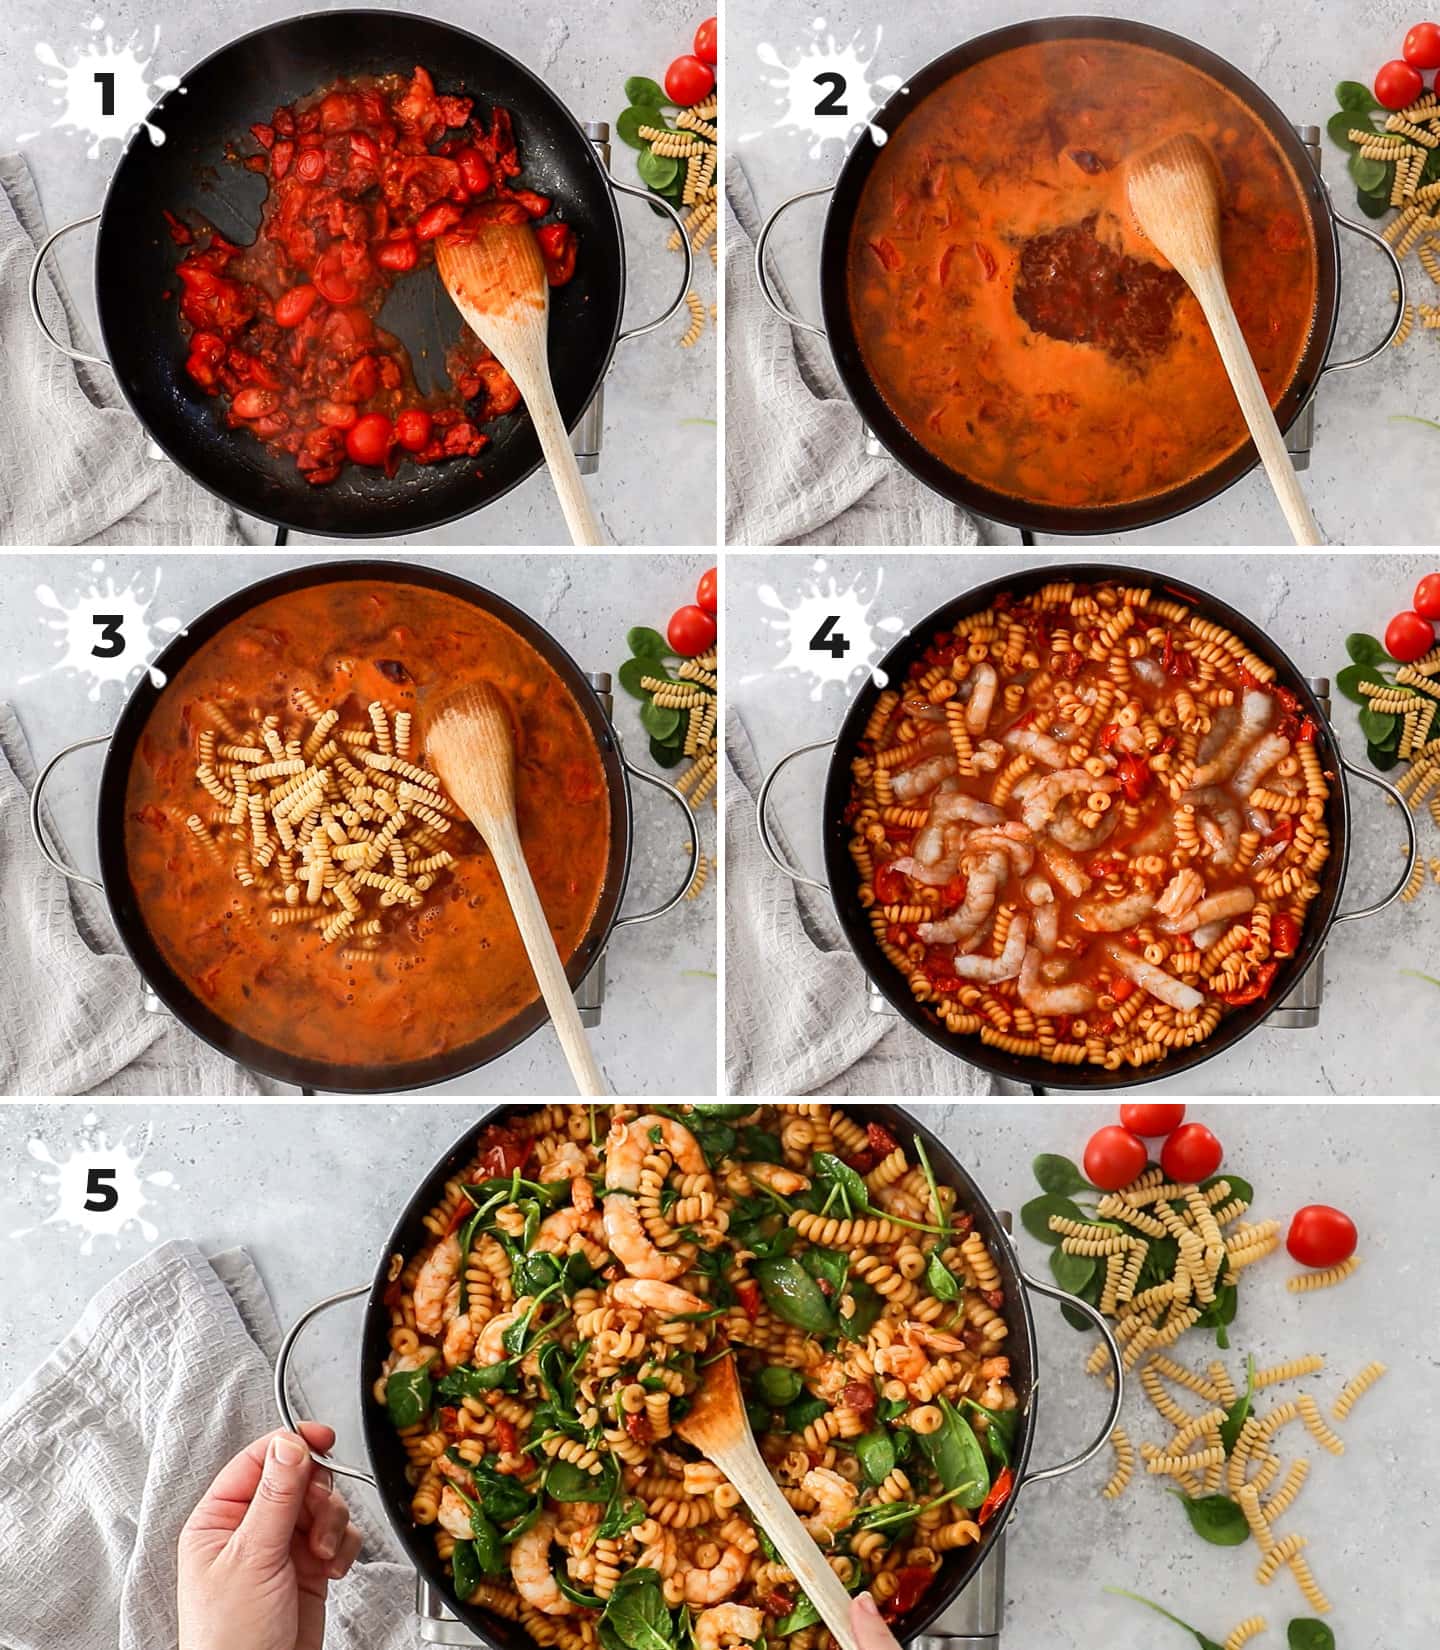 A collage of 5 images showing how to make prawn and chorizo pasta.